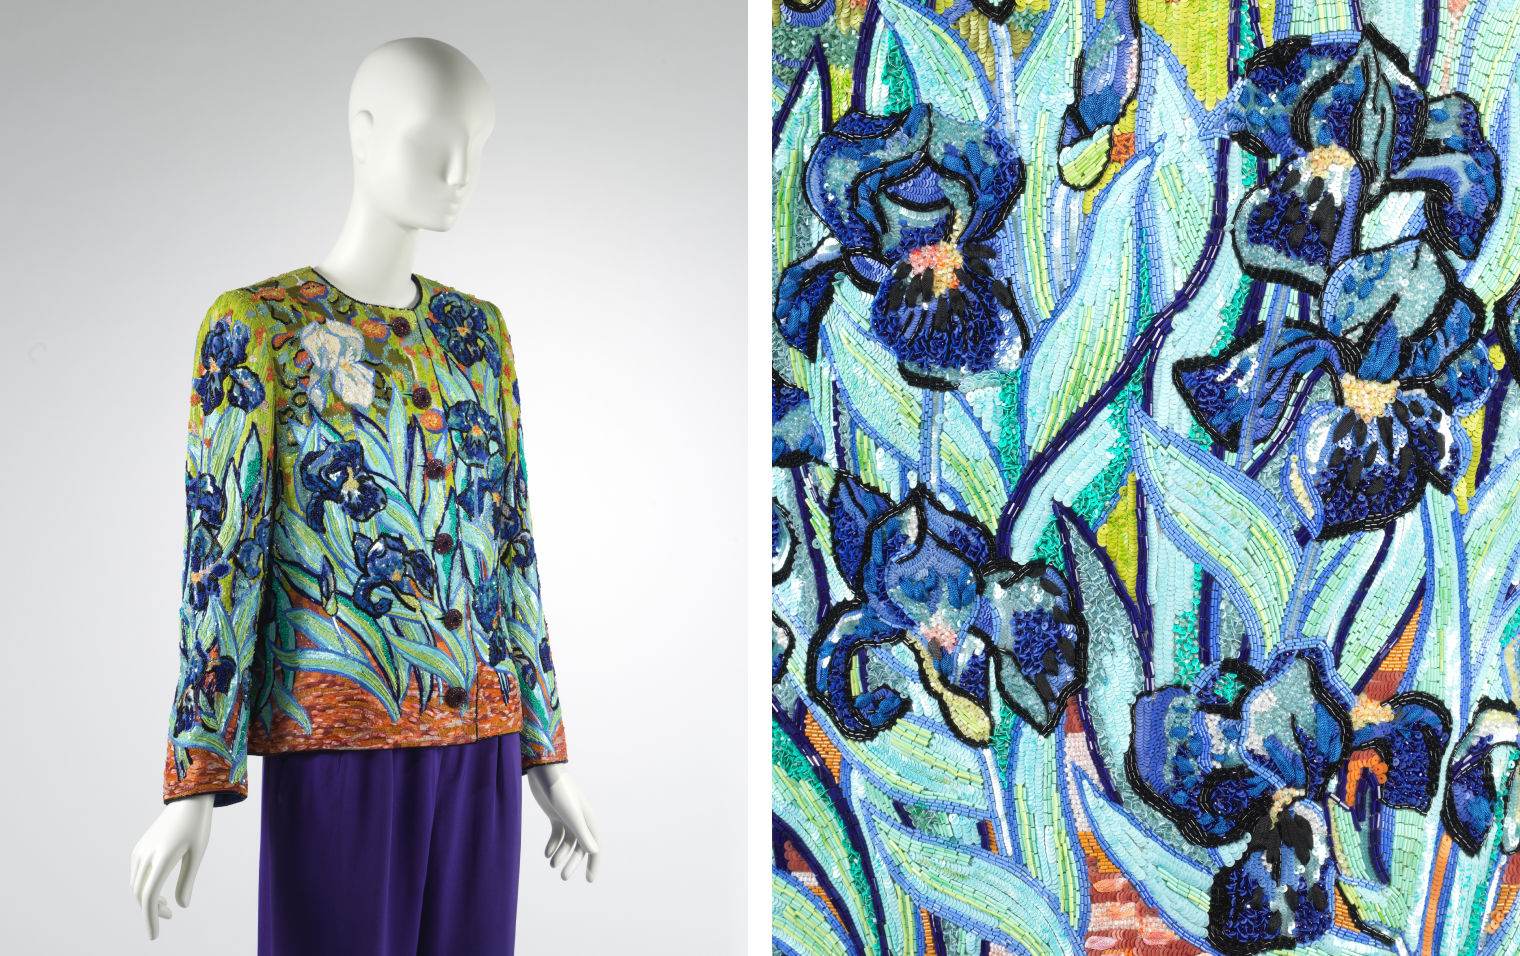 Composite image of Yves Saint Laurent Iris jacket and a close up showcasing the intricate embroidery of the flowers